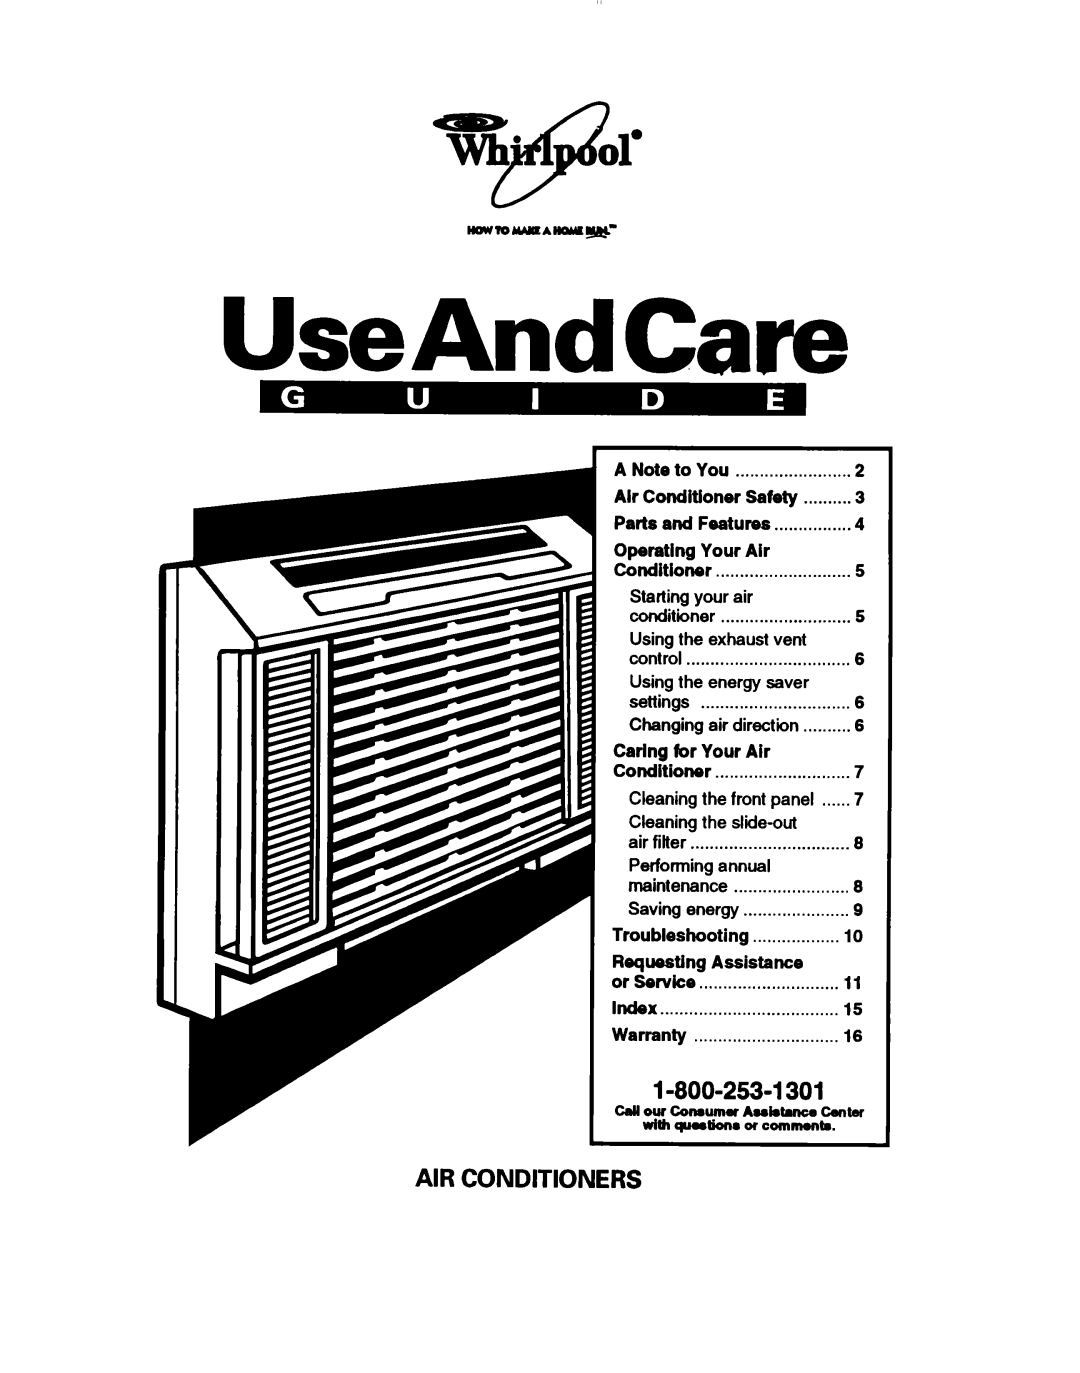 Whirlpool ACU124XD0 warranty nawTouua*naur~, UseAndCare, wh 01’ H, I-800-253-1301, Air Conditioners 